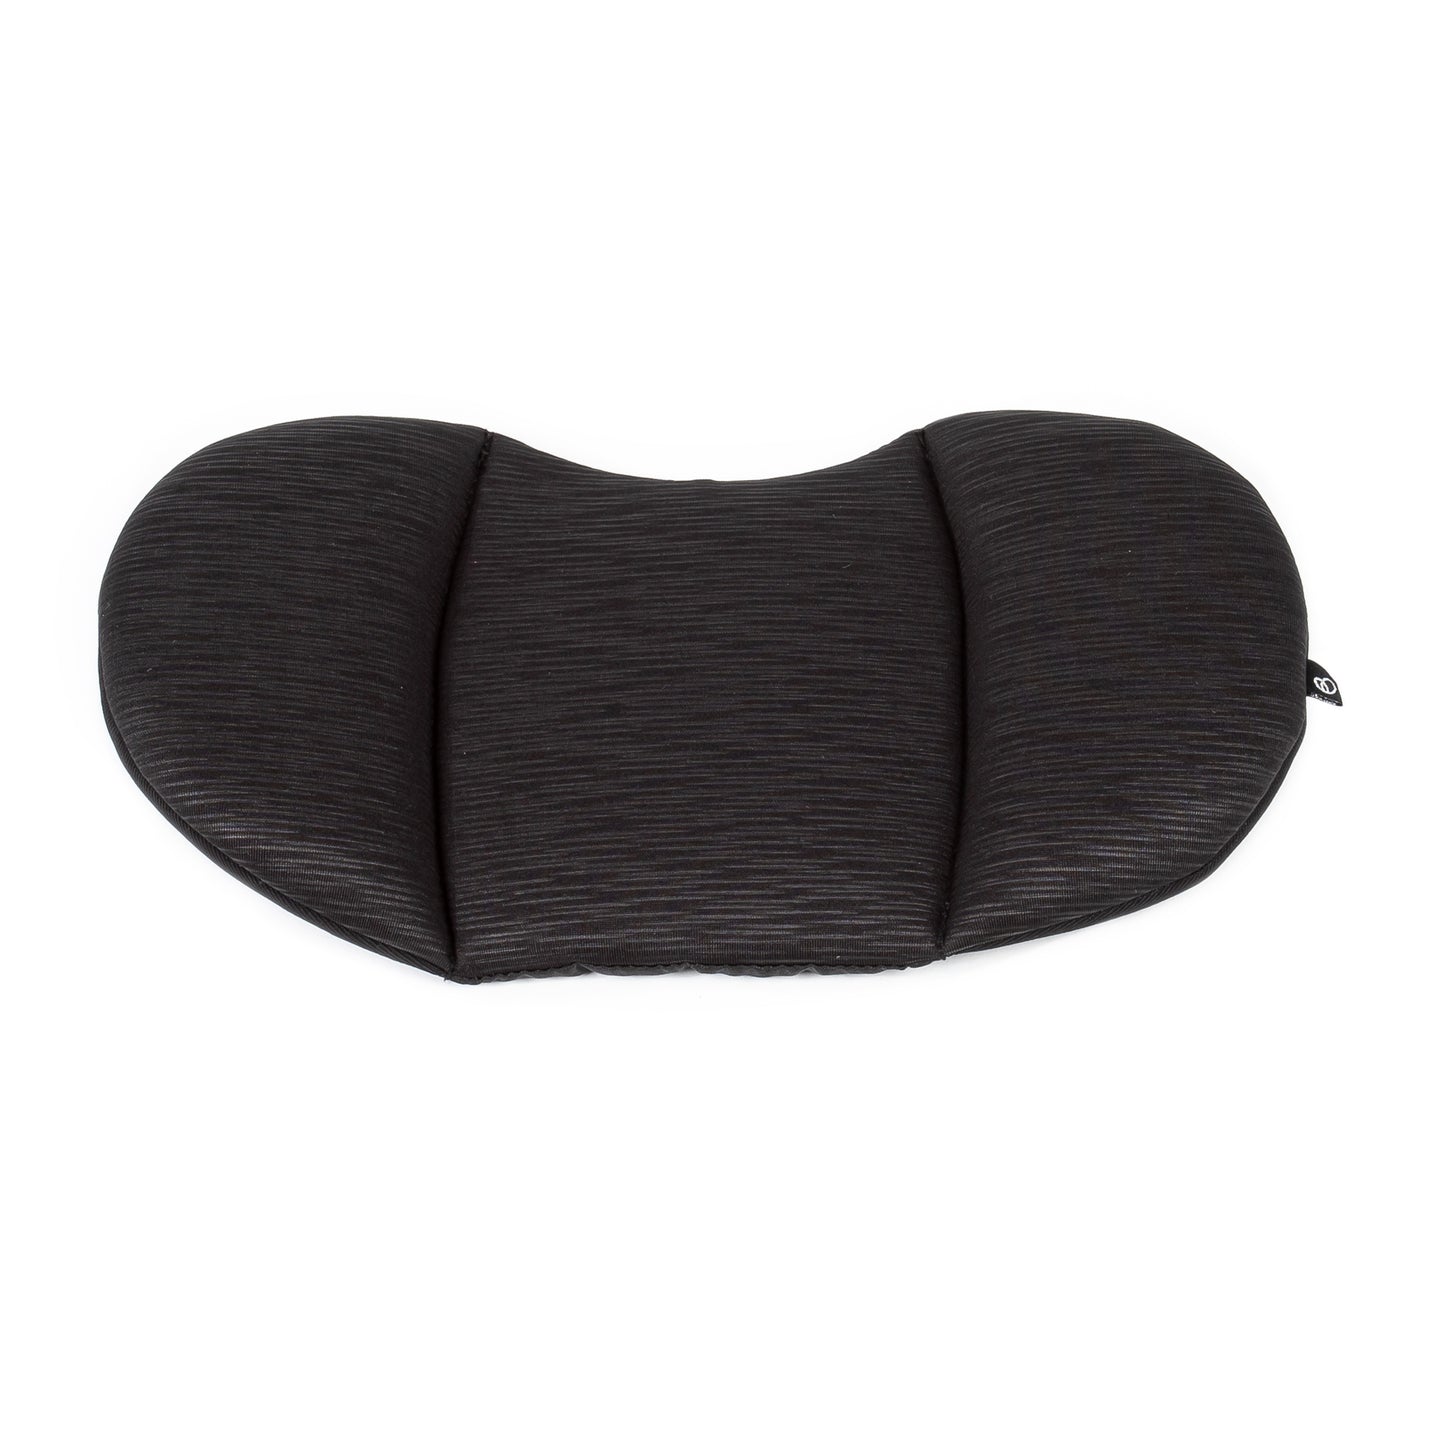 Revolve360 Convertible Replacement Removable Head Pillow, Onyx Black